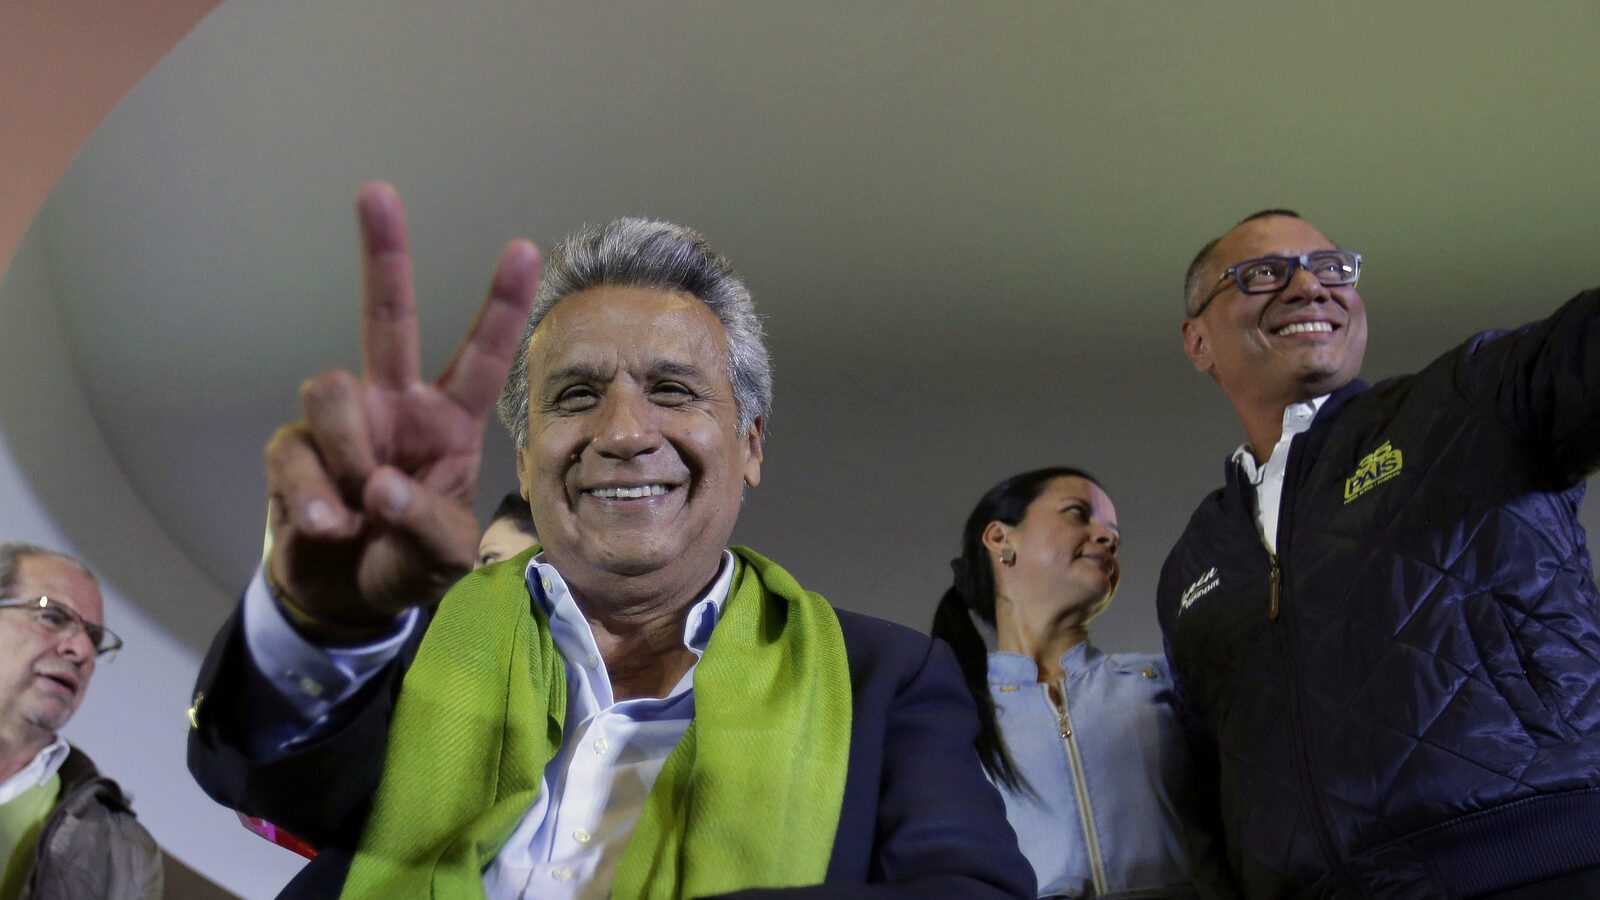 Alianza PAIS's presidential candidate Lenin Moreno, left, and his running mate Jorge Glas smile end of the day of the presidential election, in Quito, Ecuador, Sunday, April 2, 2017. (AP/Dolores Ochoa)